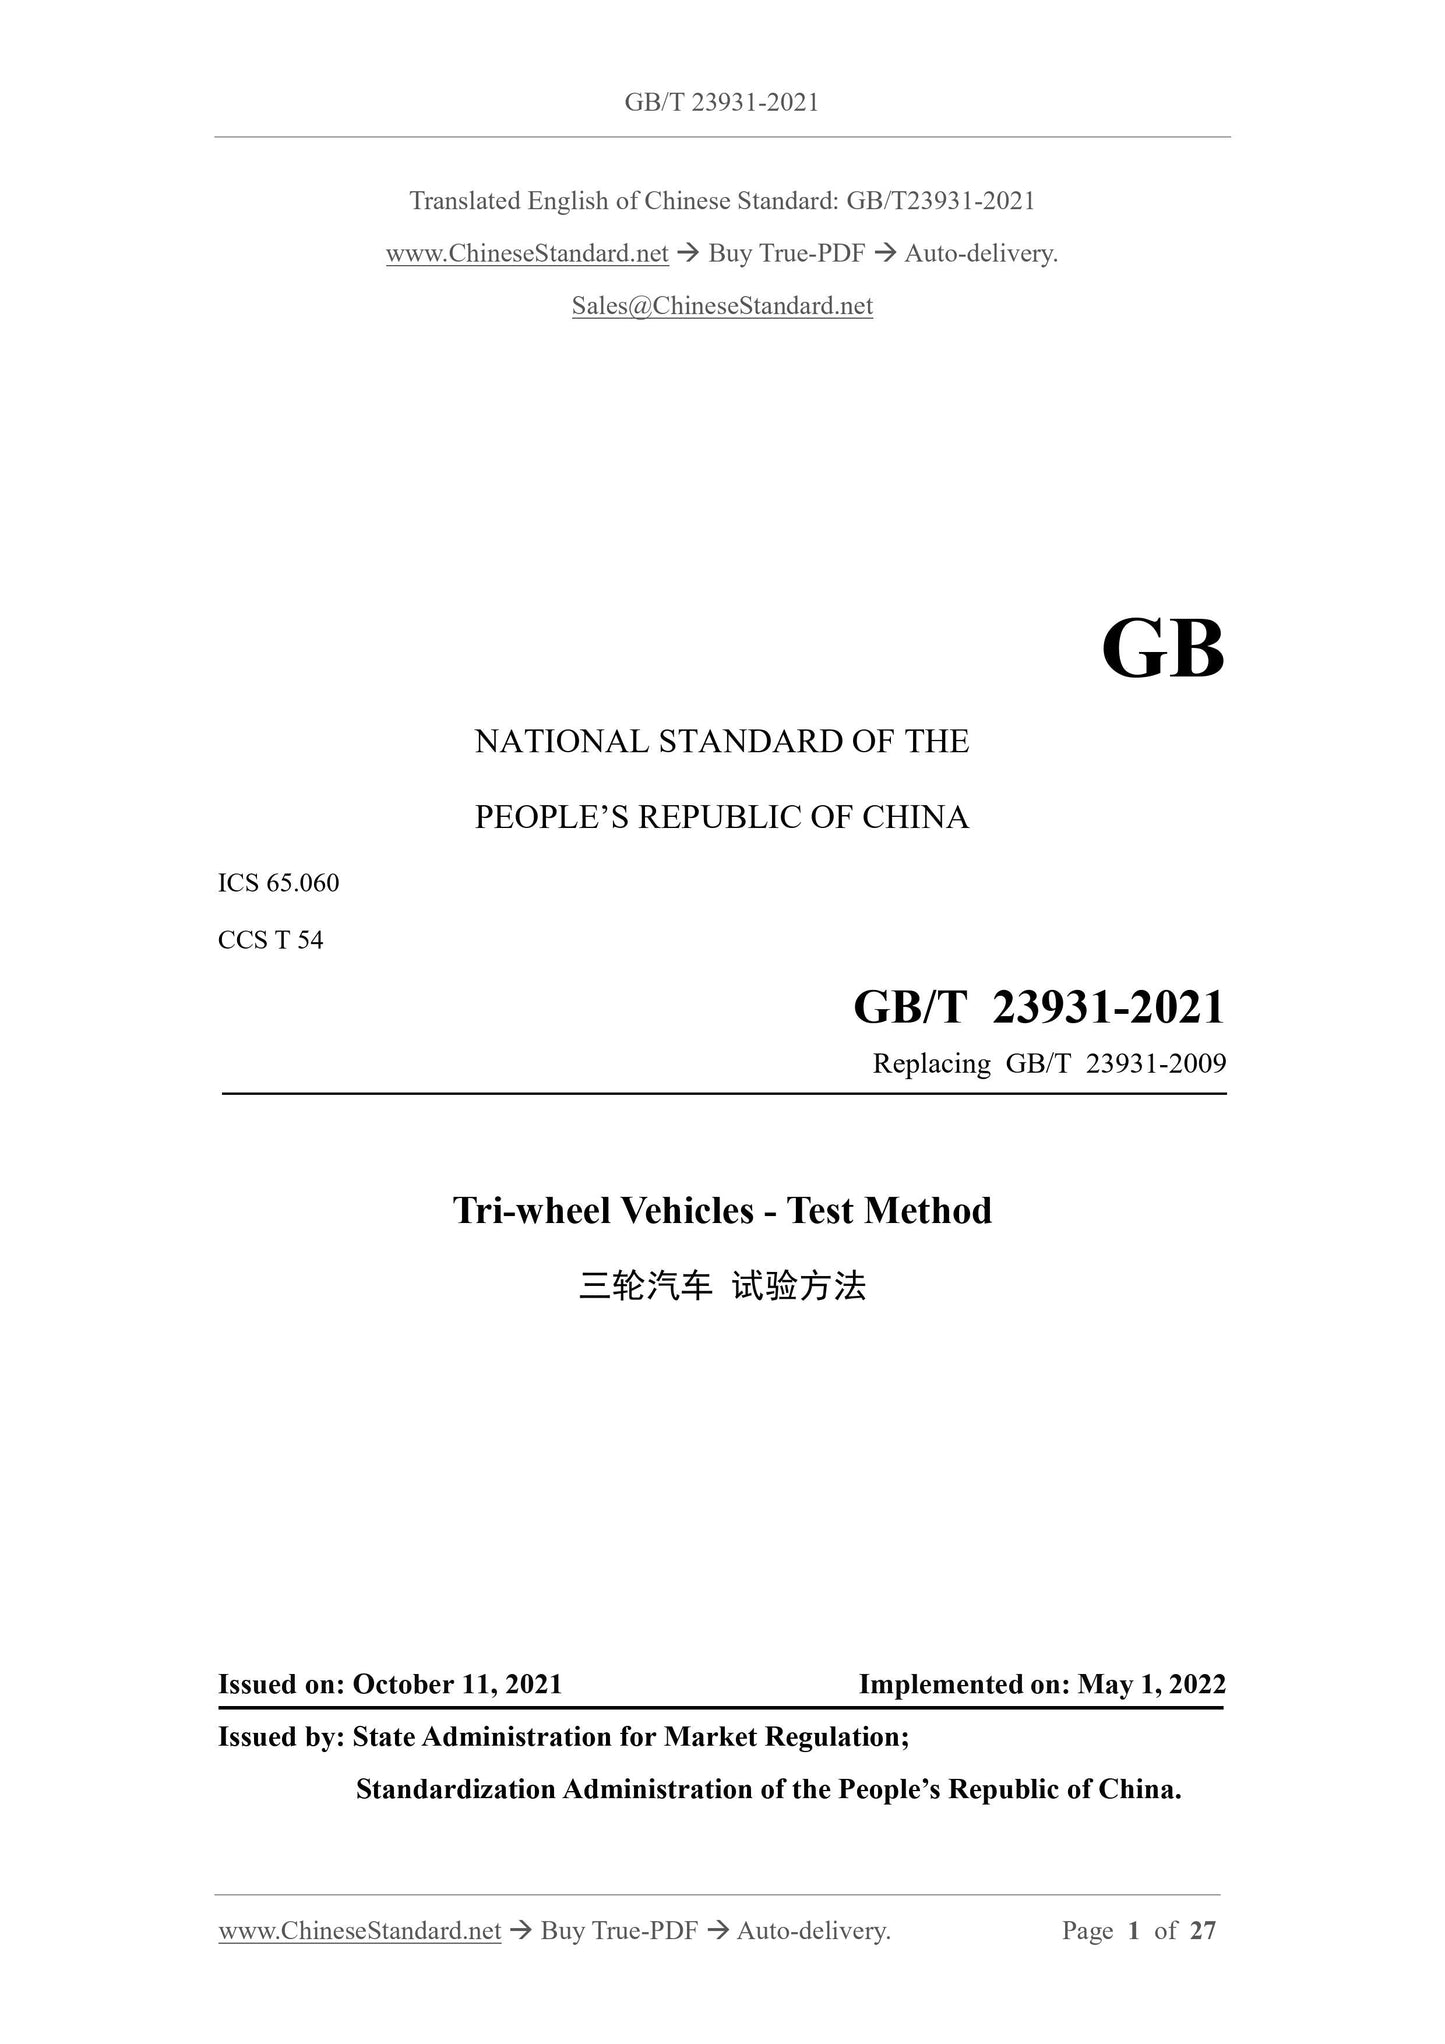 GB/T 23931-2021 Page 1